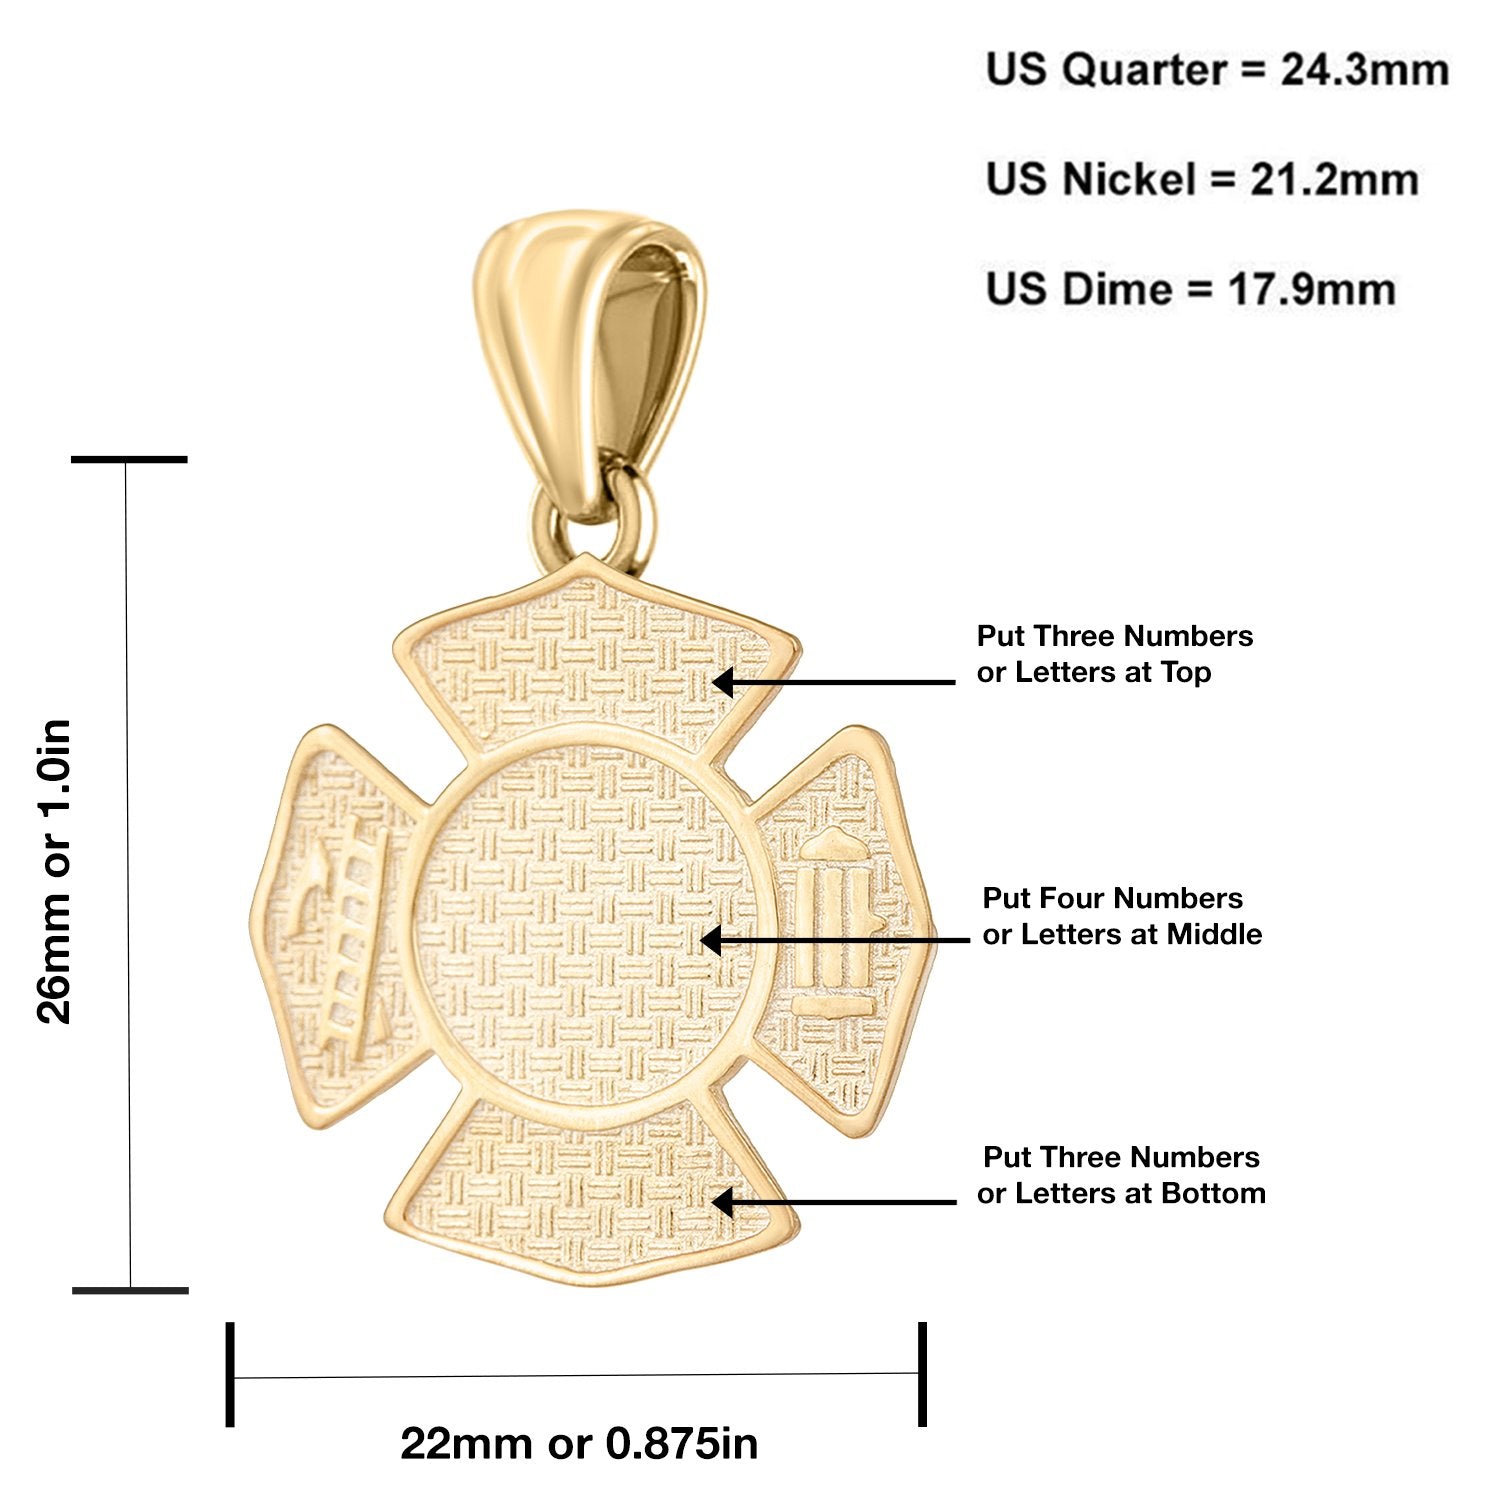 Firefighter Pendant In 14K Gold - Sizing Details